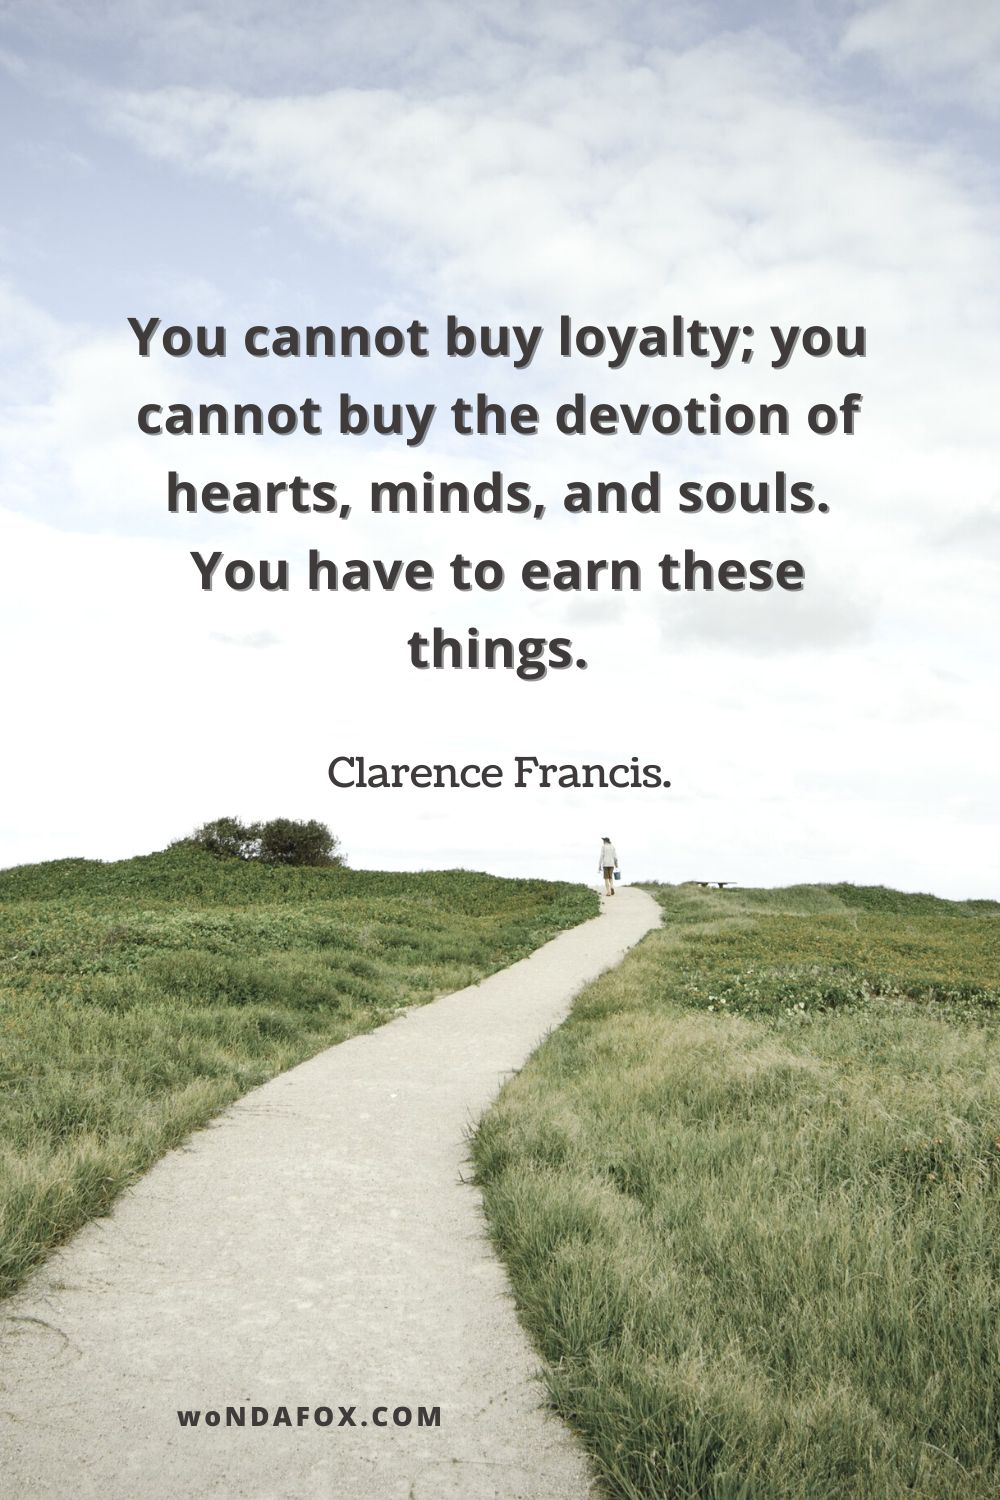 You cannot buy loyalty; you cannot buy the devotion of hearts, minds, and souls. You have to earn these things.”